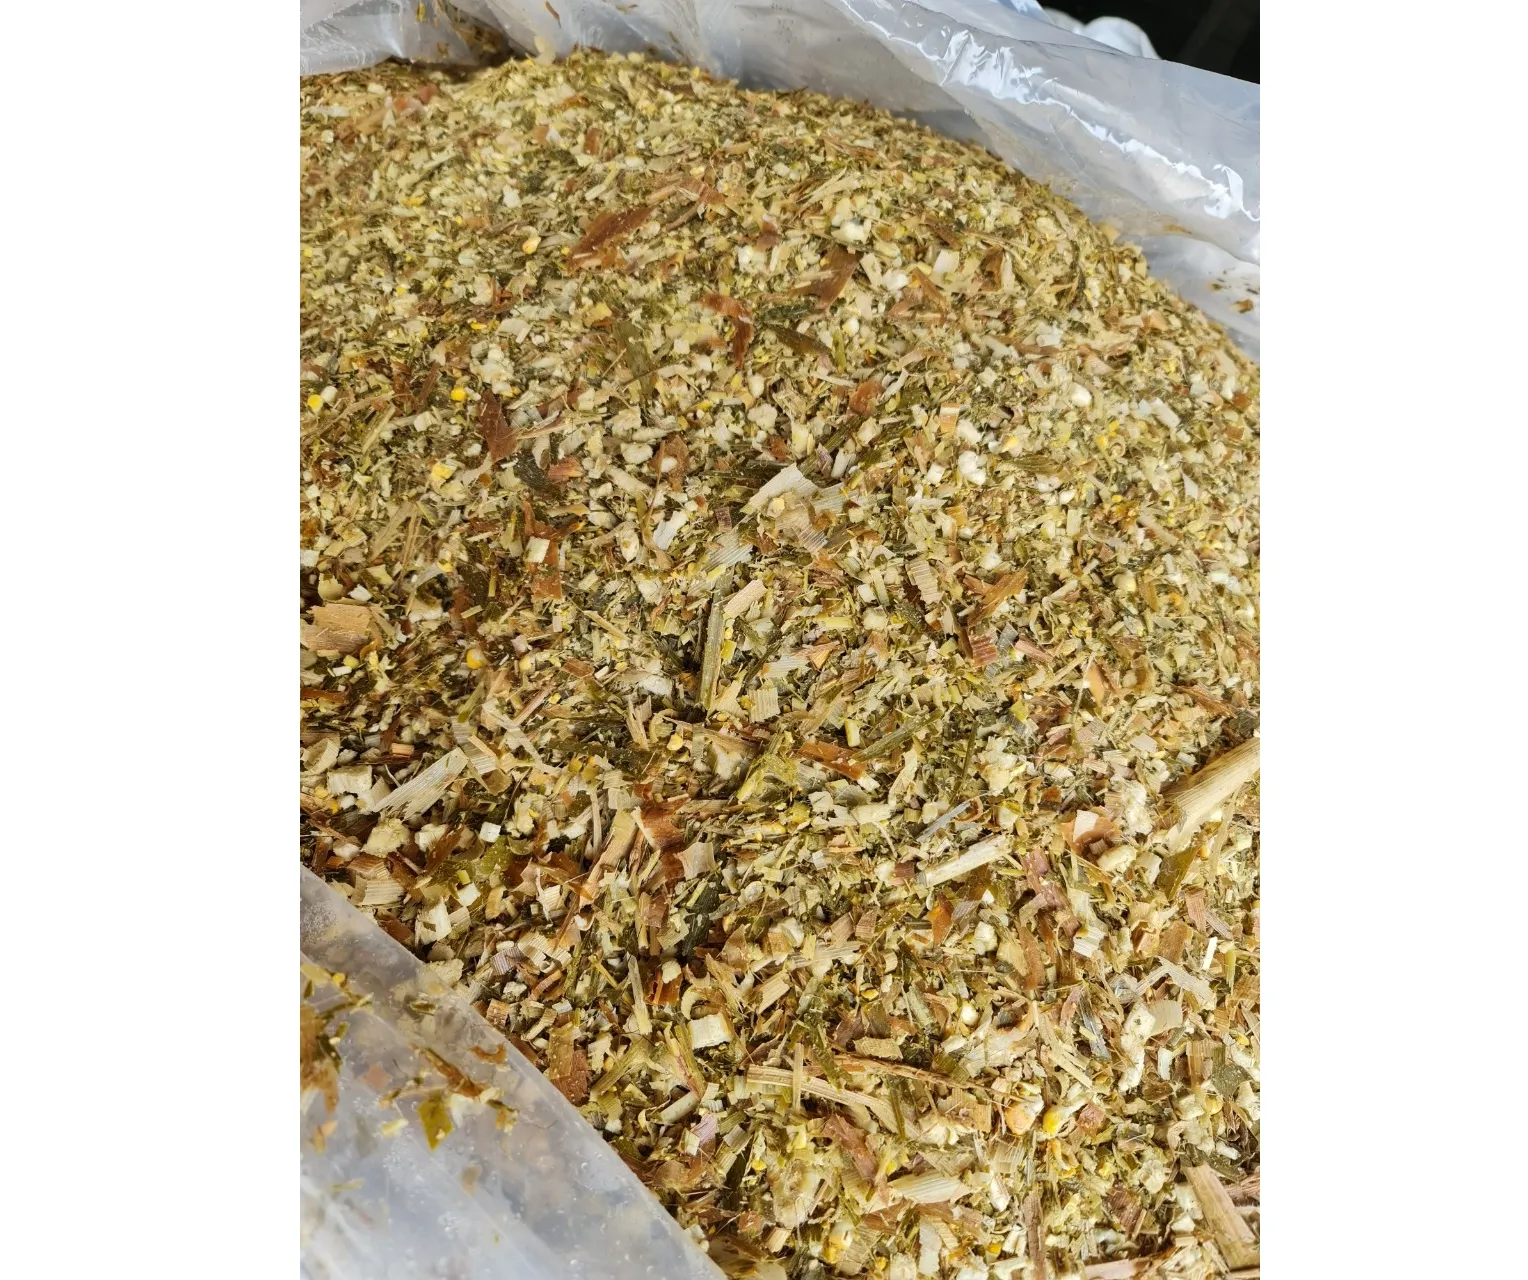 Maize Silage Feeding/ Fermented Corn Silage/ Dried Corn Silage For Animal Feed - High Quality Good Price For Sale